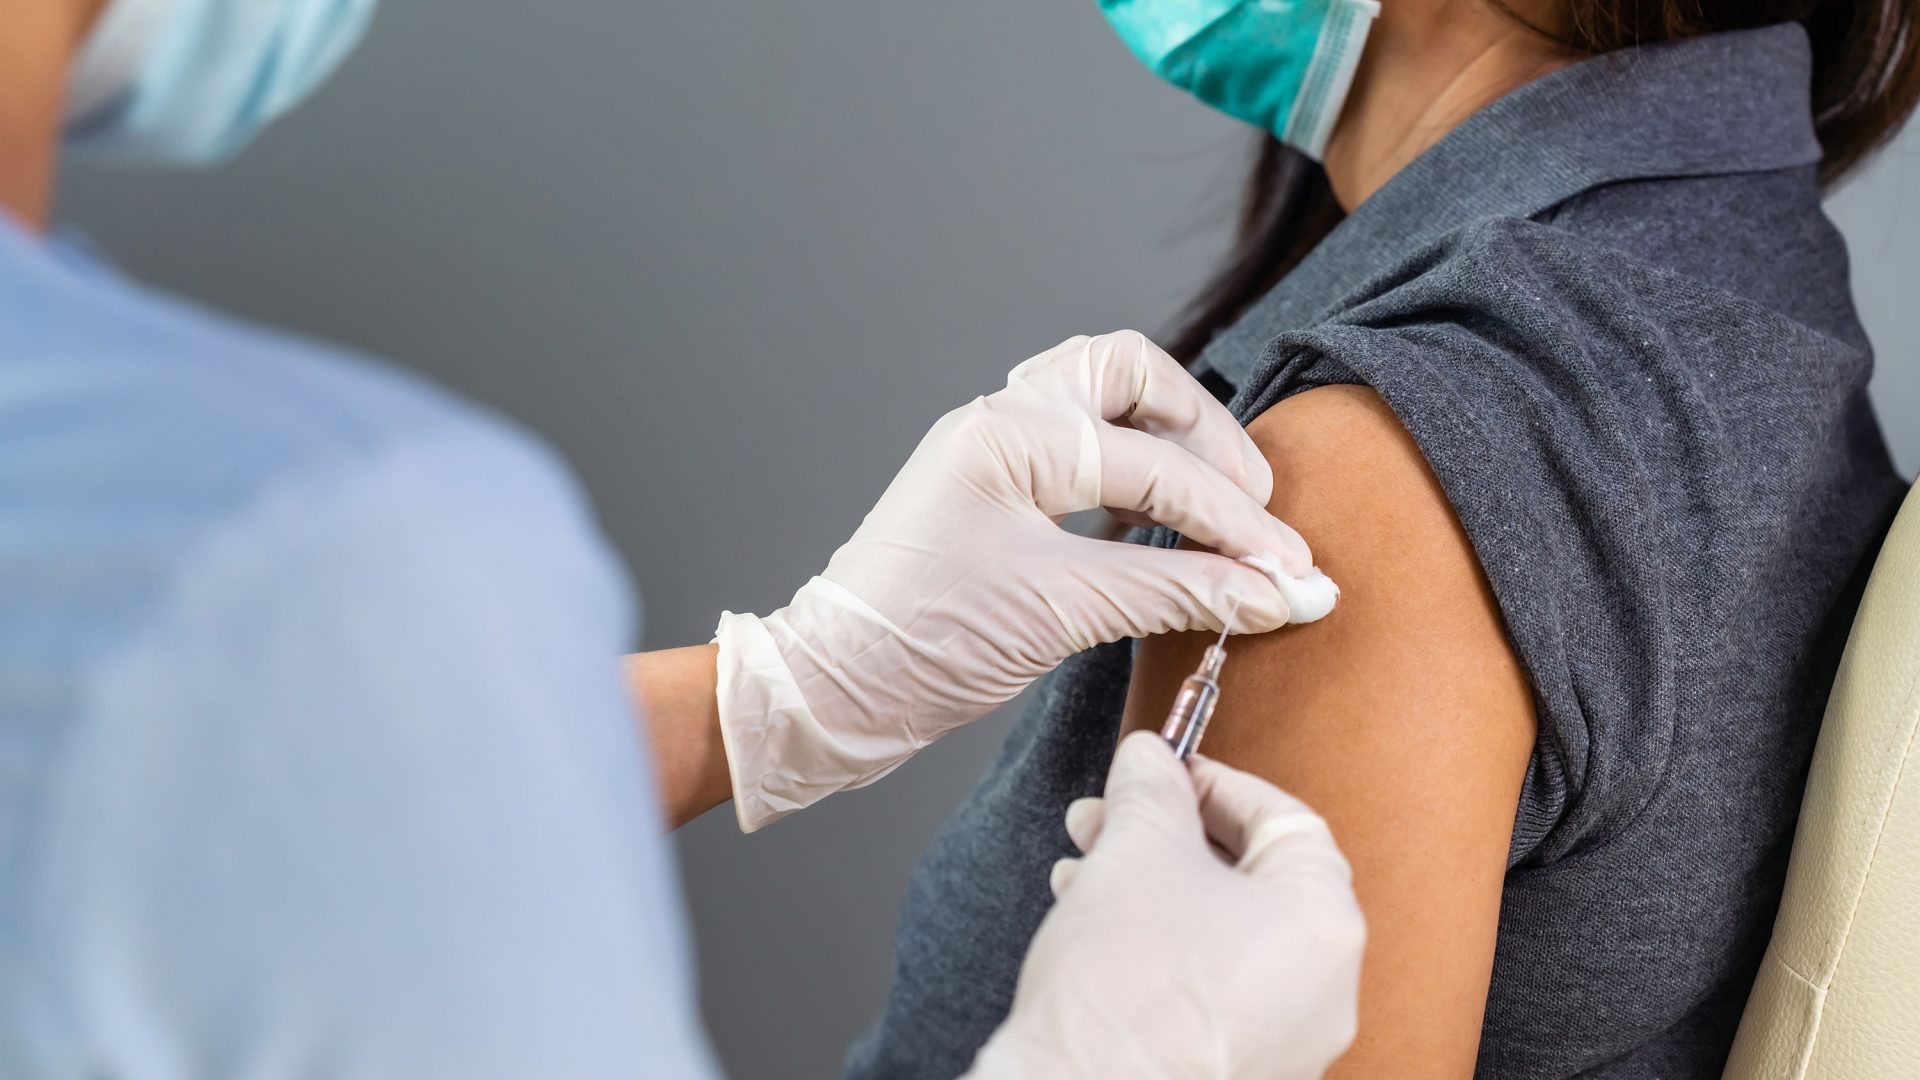 Leave tax credits are available for employees who help others get vaccinated